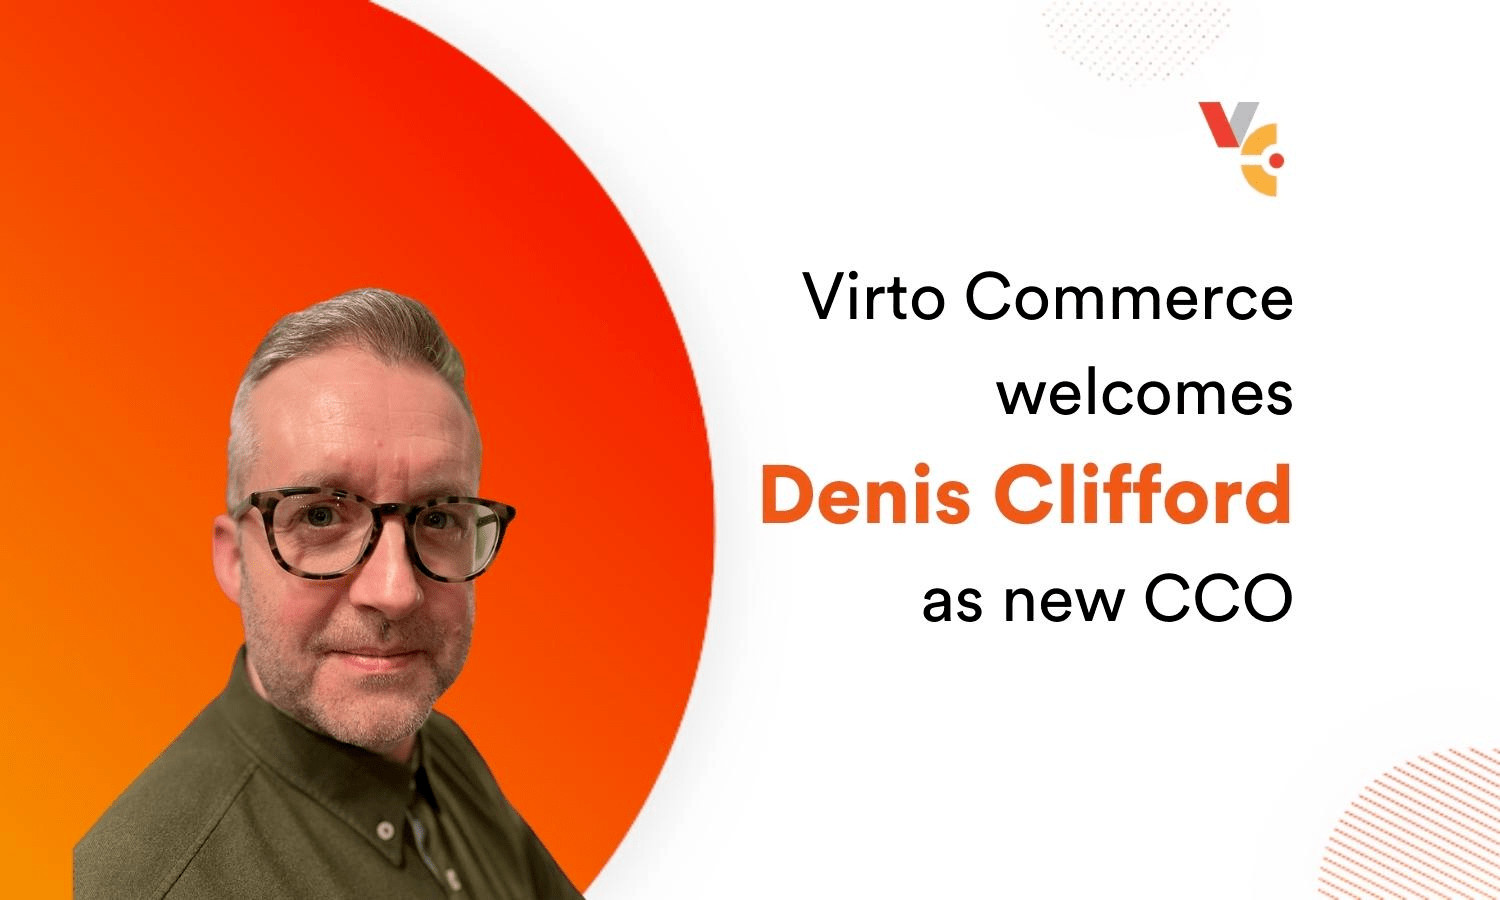 Virto Commerce Hires Denis Clifford as Chief Customer Officer